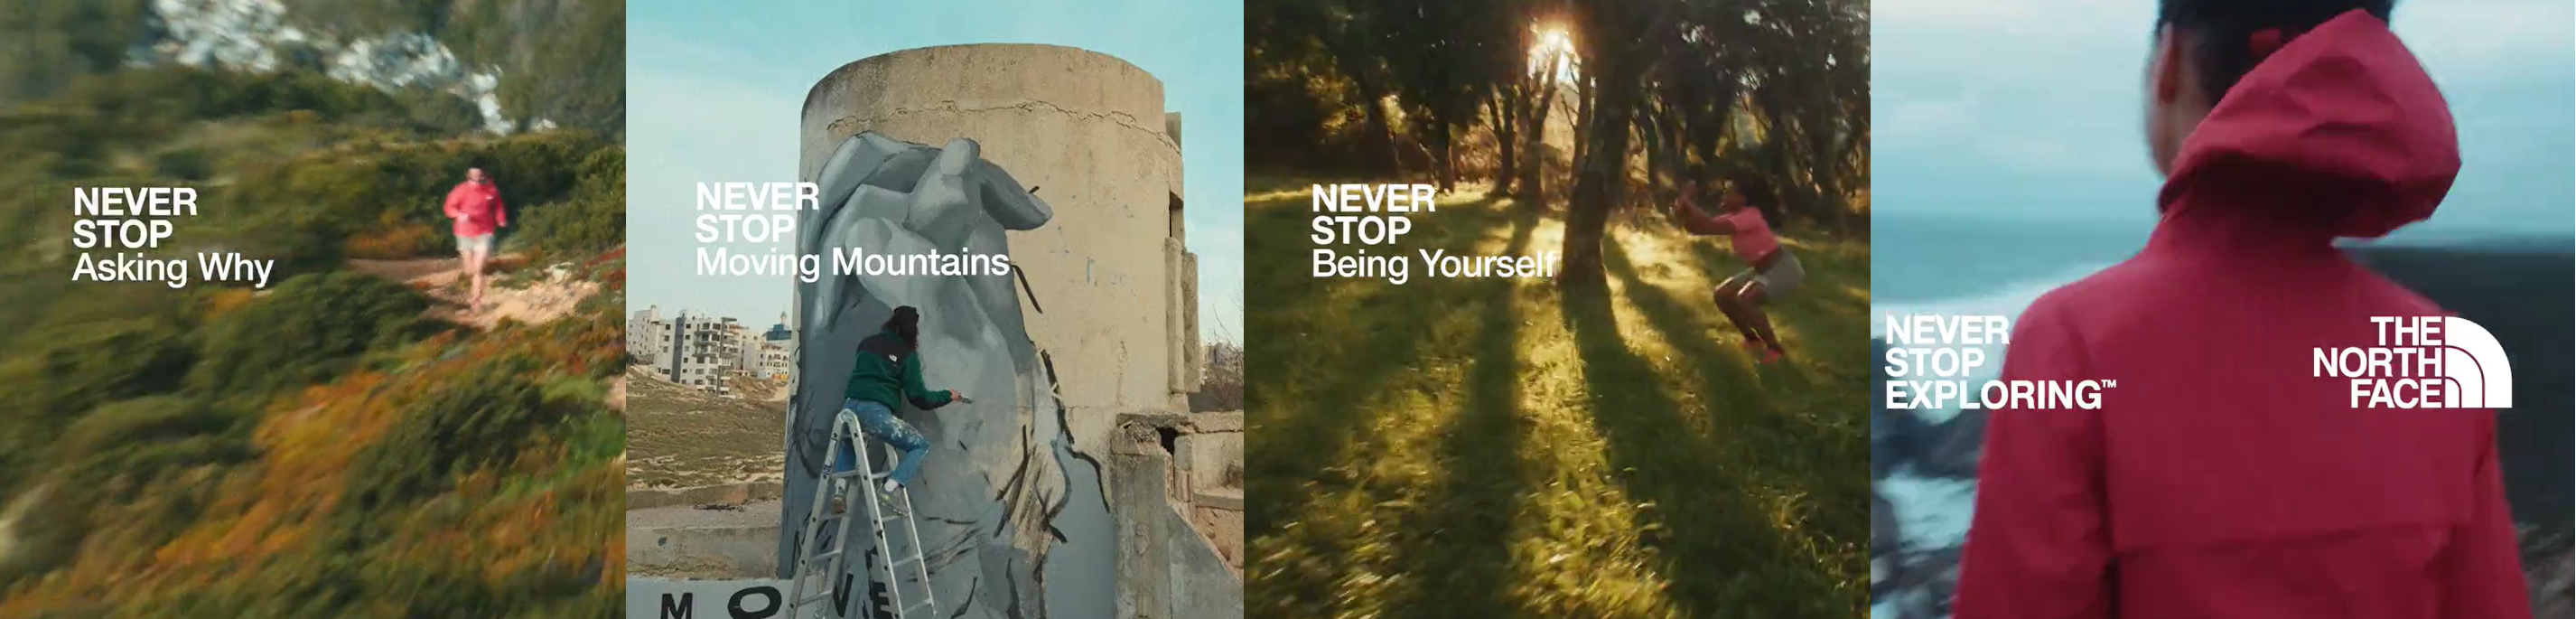 THE NORTH FACE: Campagna “Never Stop”